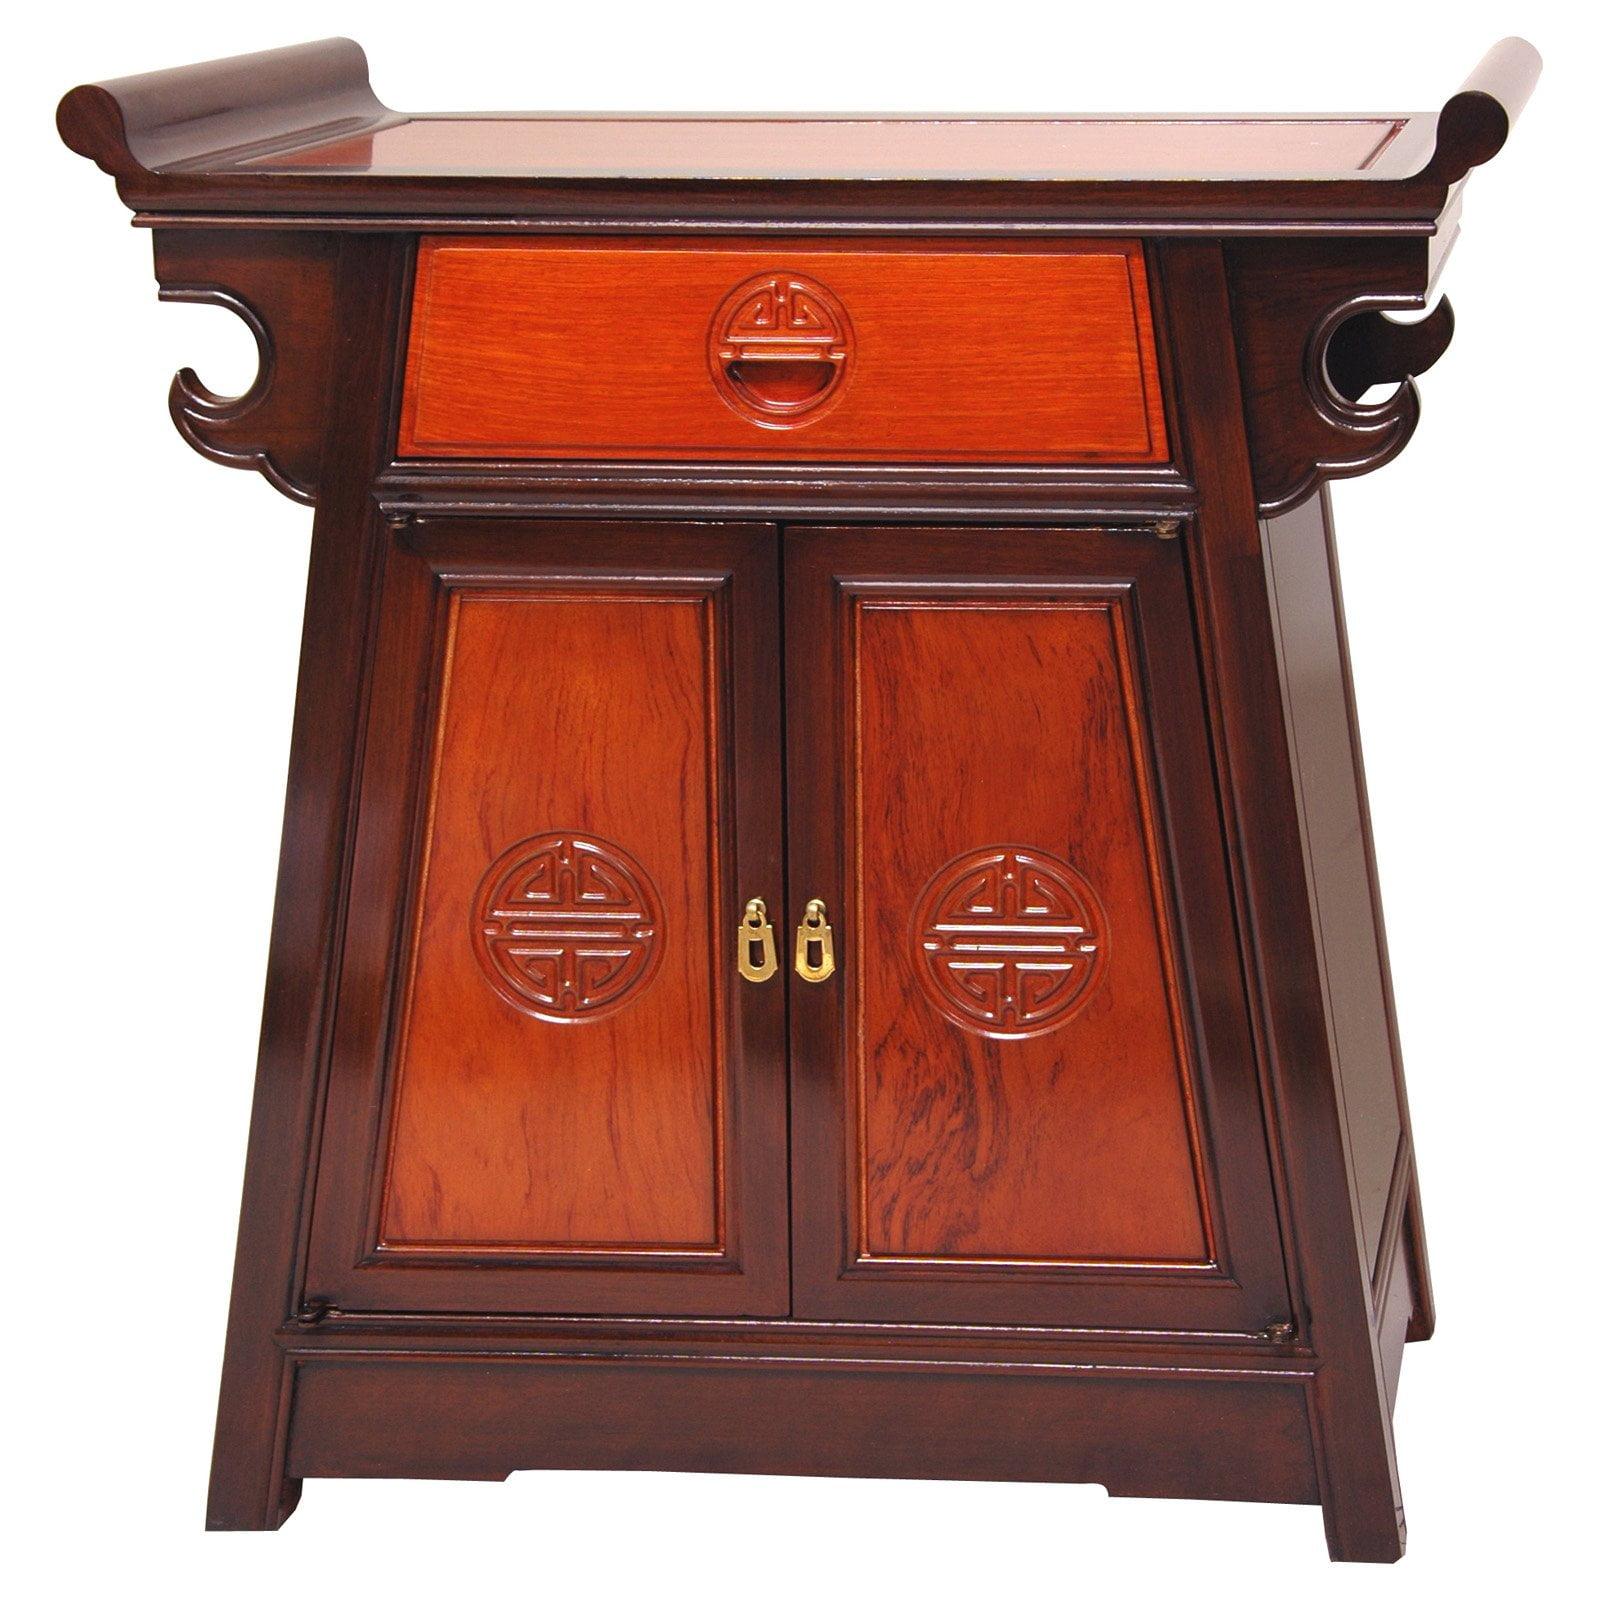 Elegant Two-Tone Rosewood Altar Cabinet with Carved Long Life Symbols